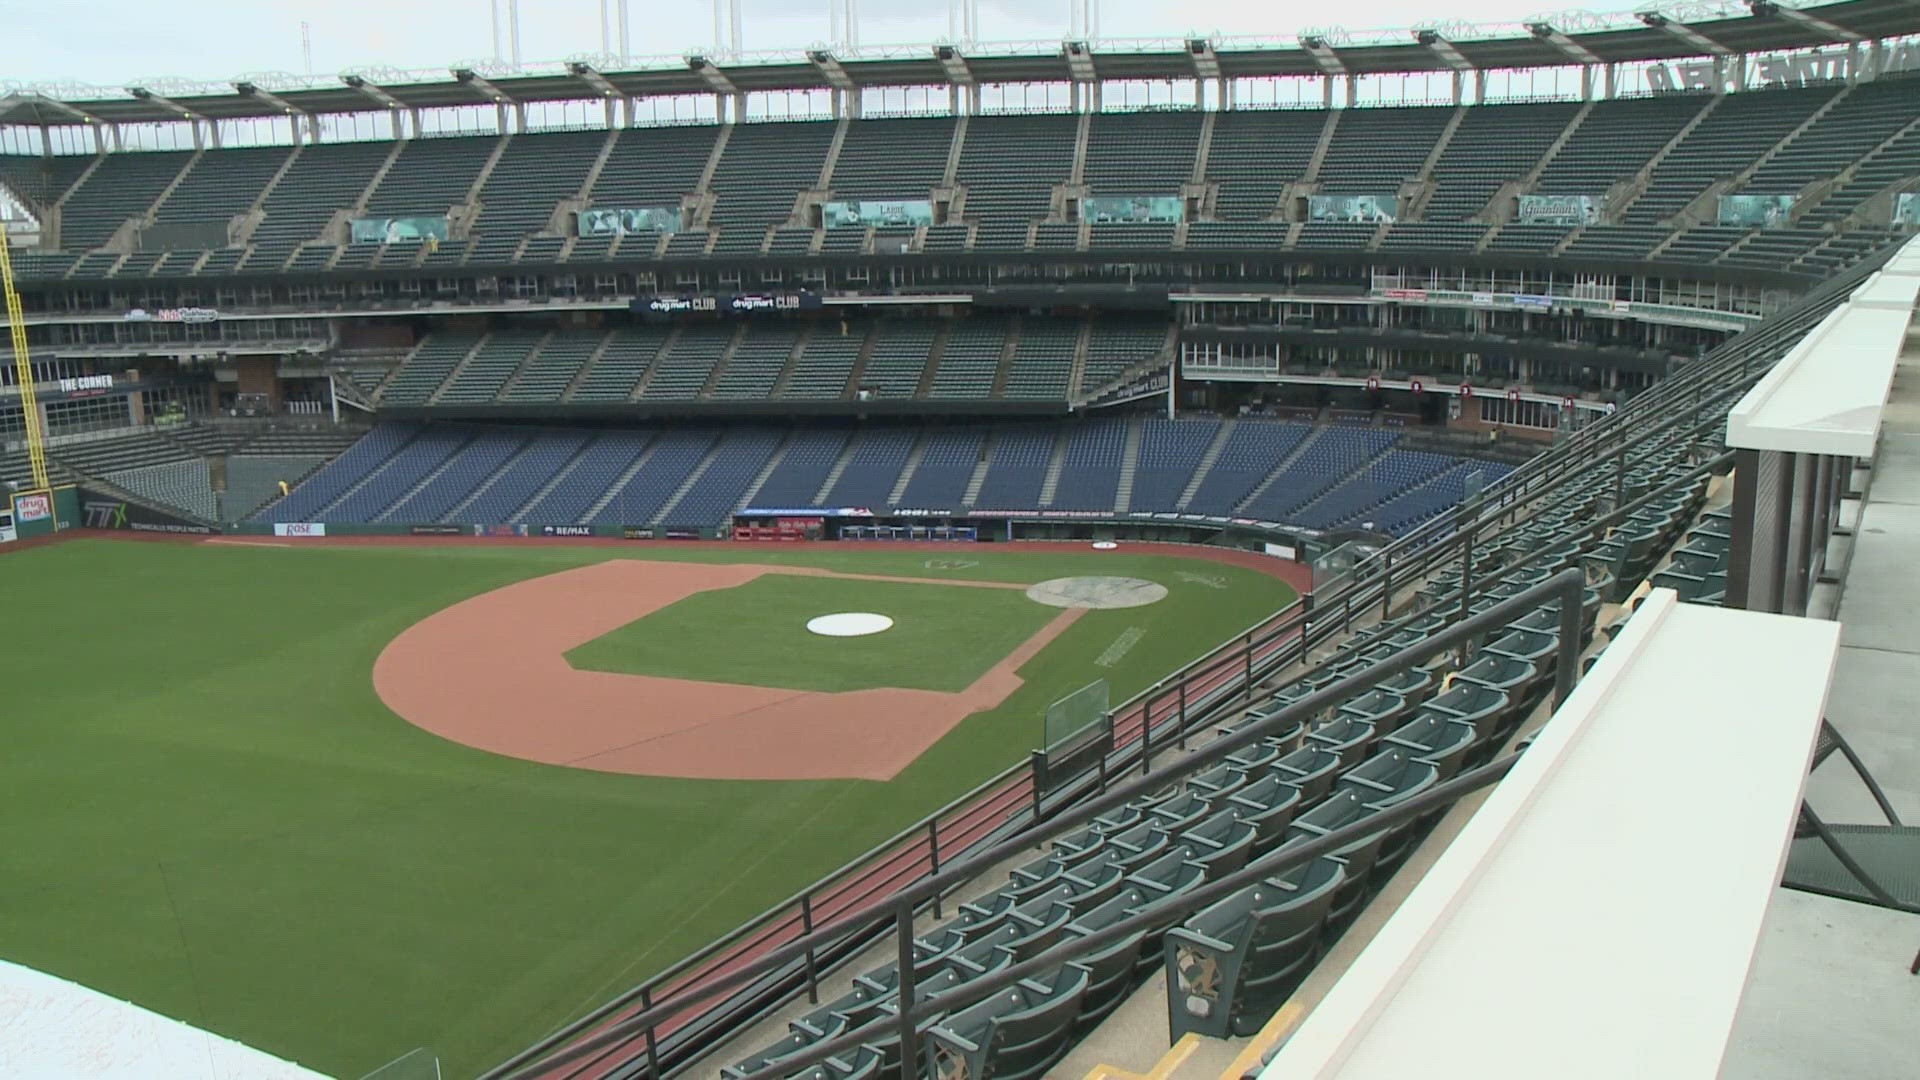 Cleveland Guardians fans will get the first chance to see new improvements at Progressive Field during Monday's home opener.